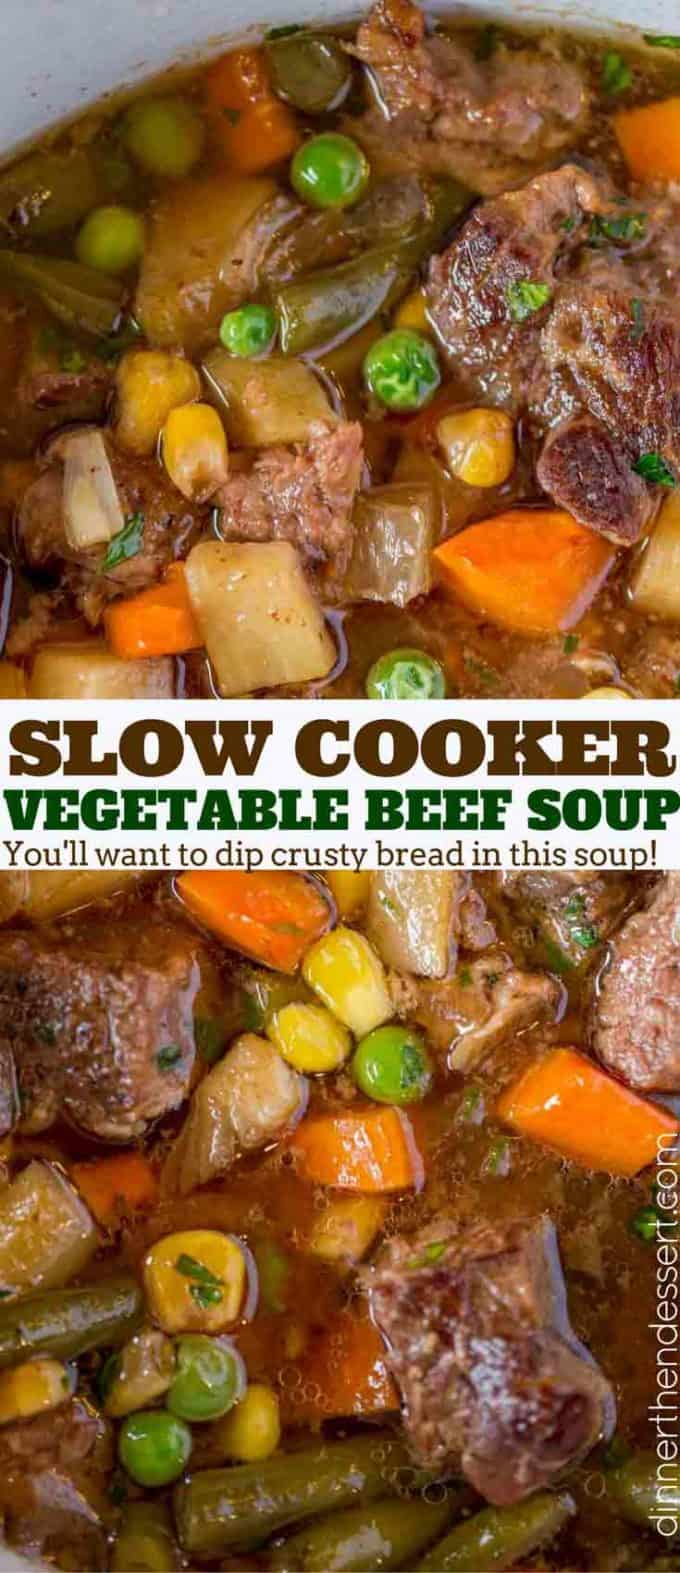 Slow Cooker Vegetable Beef Soup with is the most comforting, EASY soup you'll make. You'll want to dip crusty bread into the amazing flavors in this soup! #soup #beef #slowcooker #crockpot #comfortfood